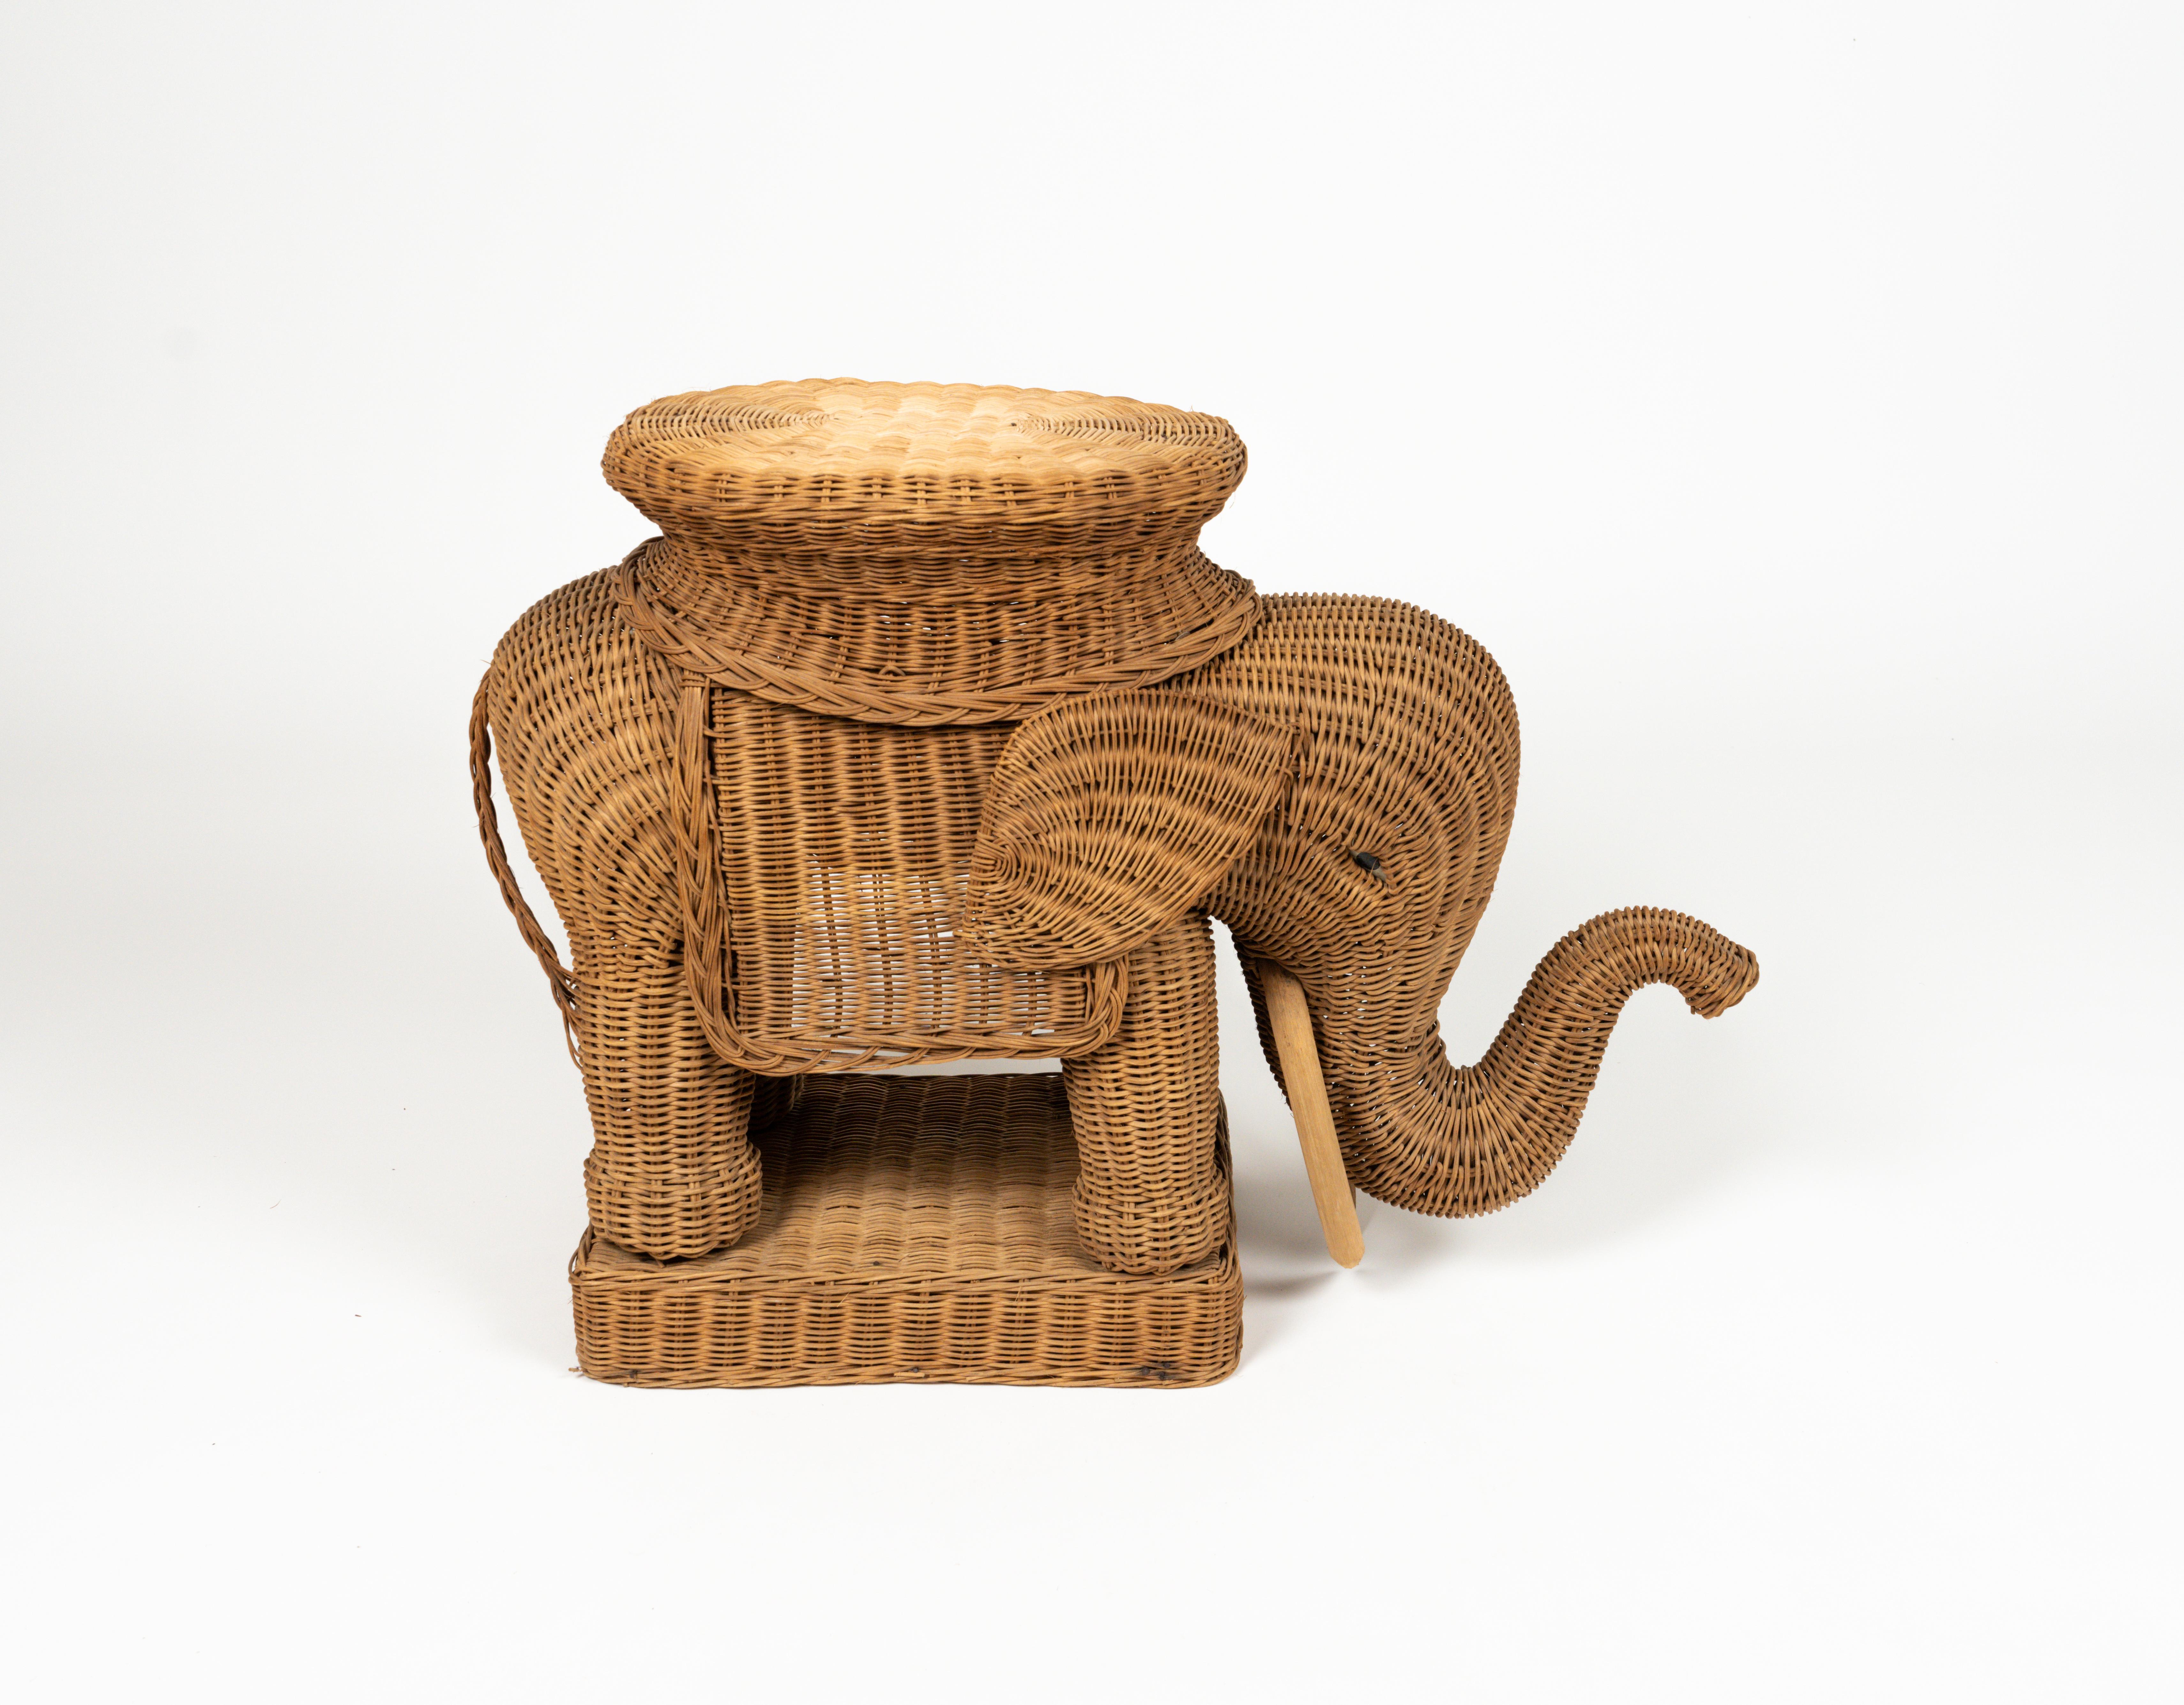 Rattan & Wicker Elephant Side Coffee Table Vivai Del Sud Style, Italy, 1960s For Sale 4